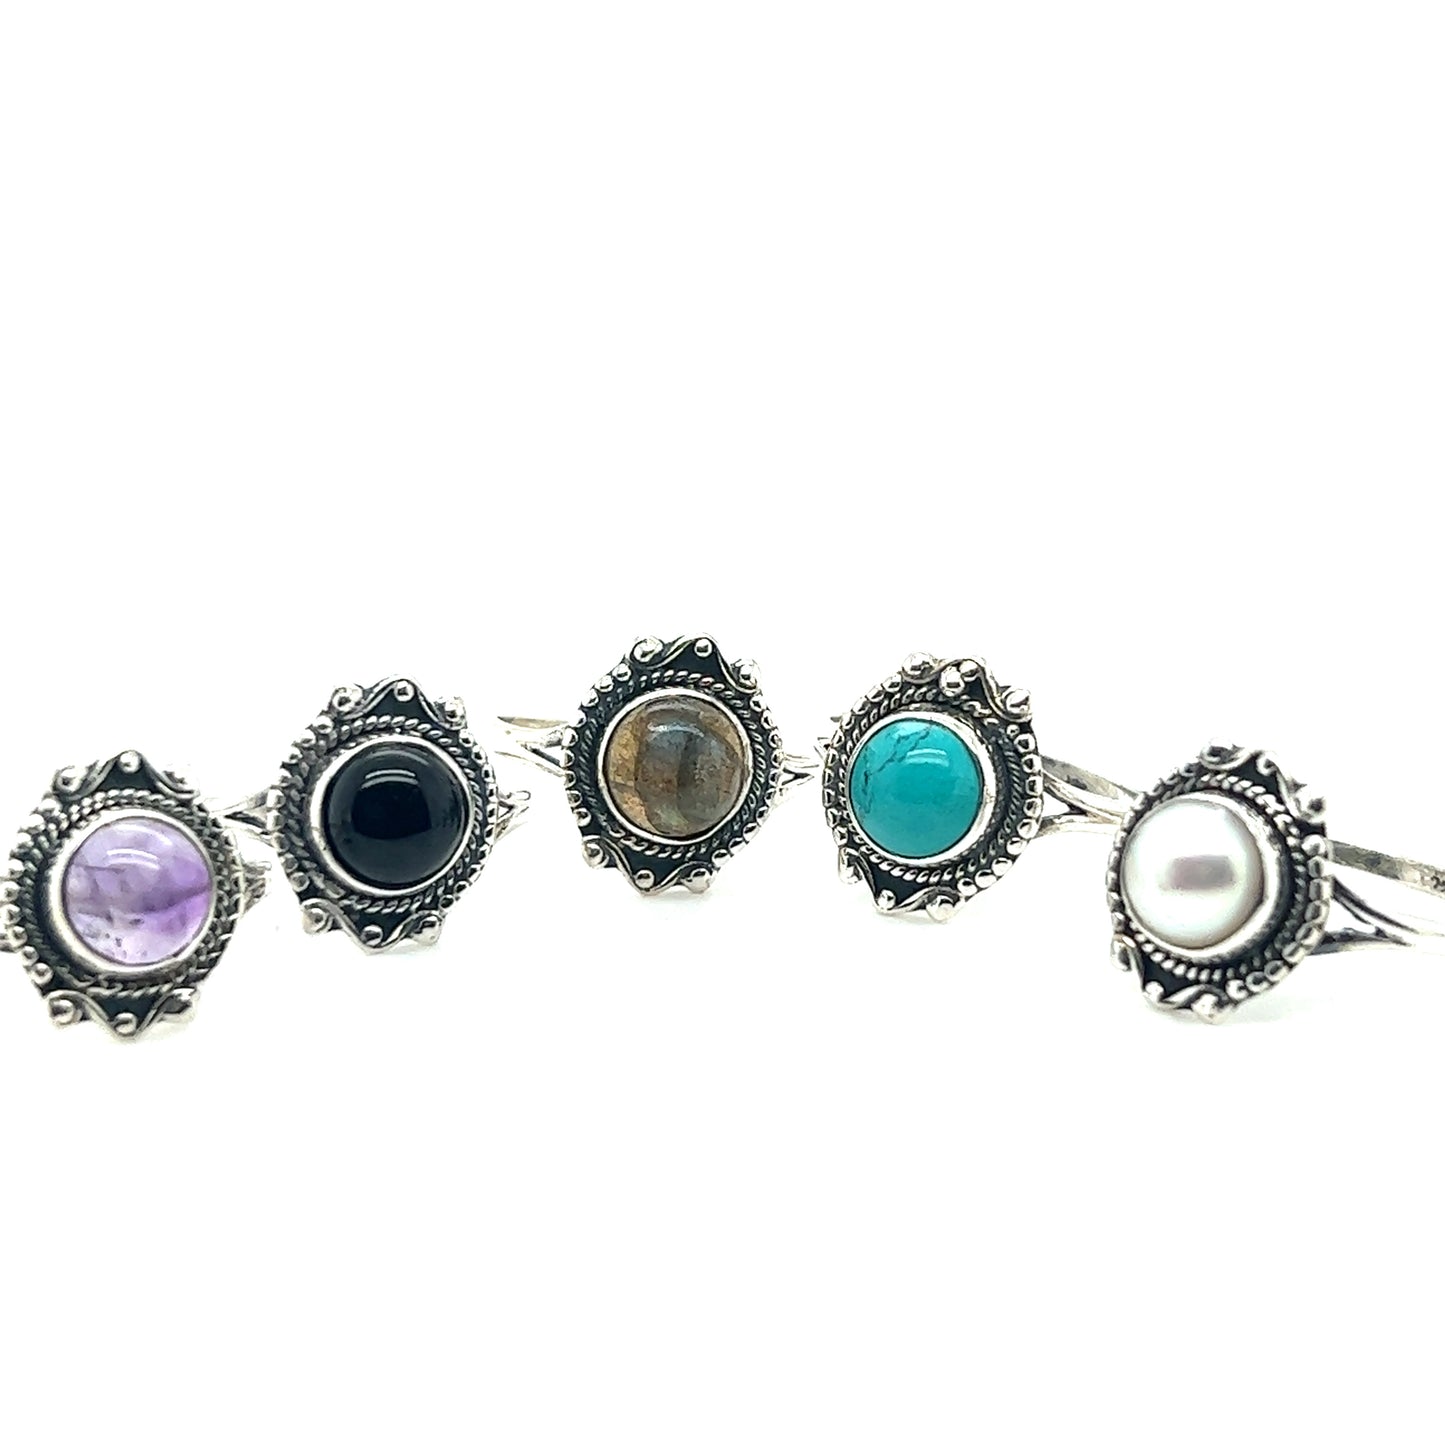 Five Round Gemstone Rings With Vintage Setting featuring amethyst, onyx, labradorite, turquoise, and pearl are set in intricate metal settings. These beautiful pieces of bohemian jewelry are displayed in a row on a white background.